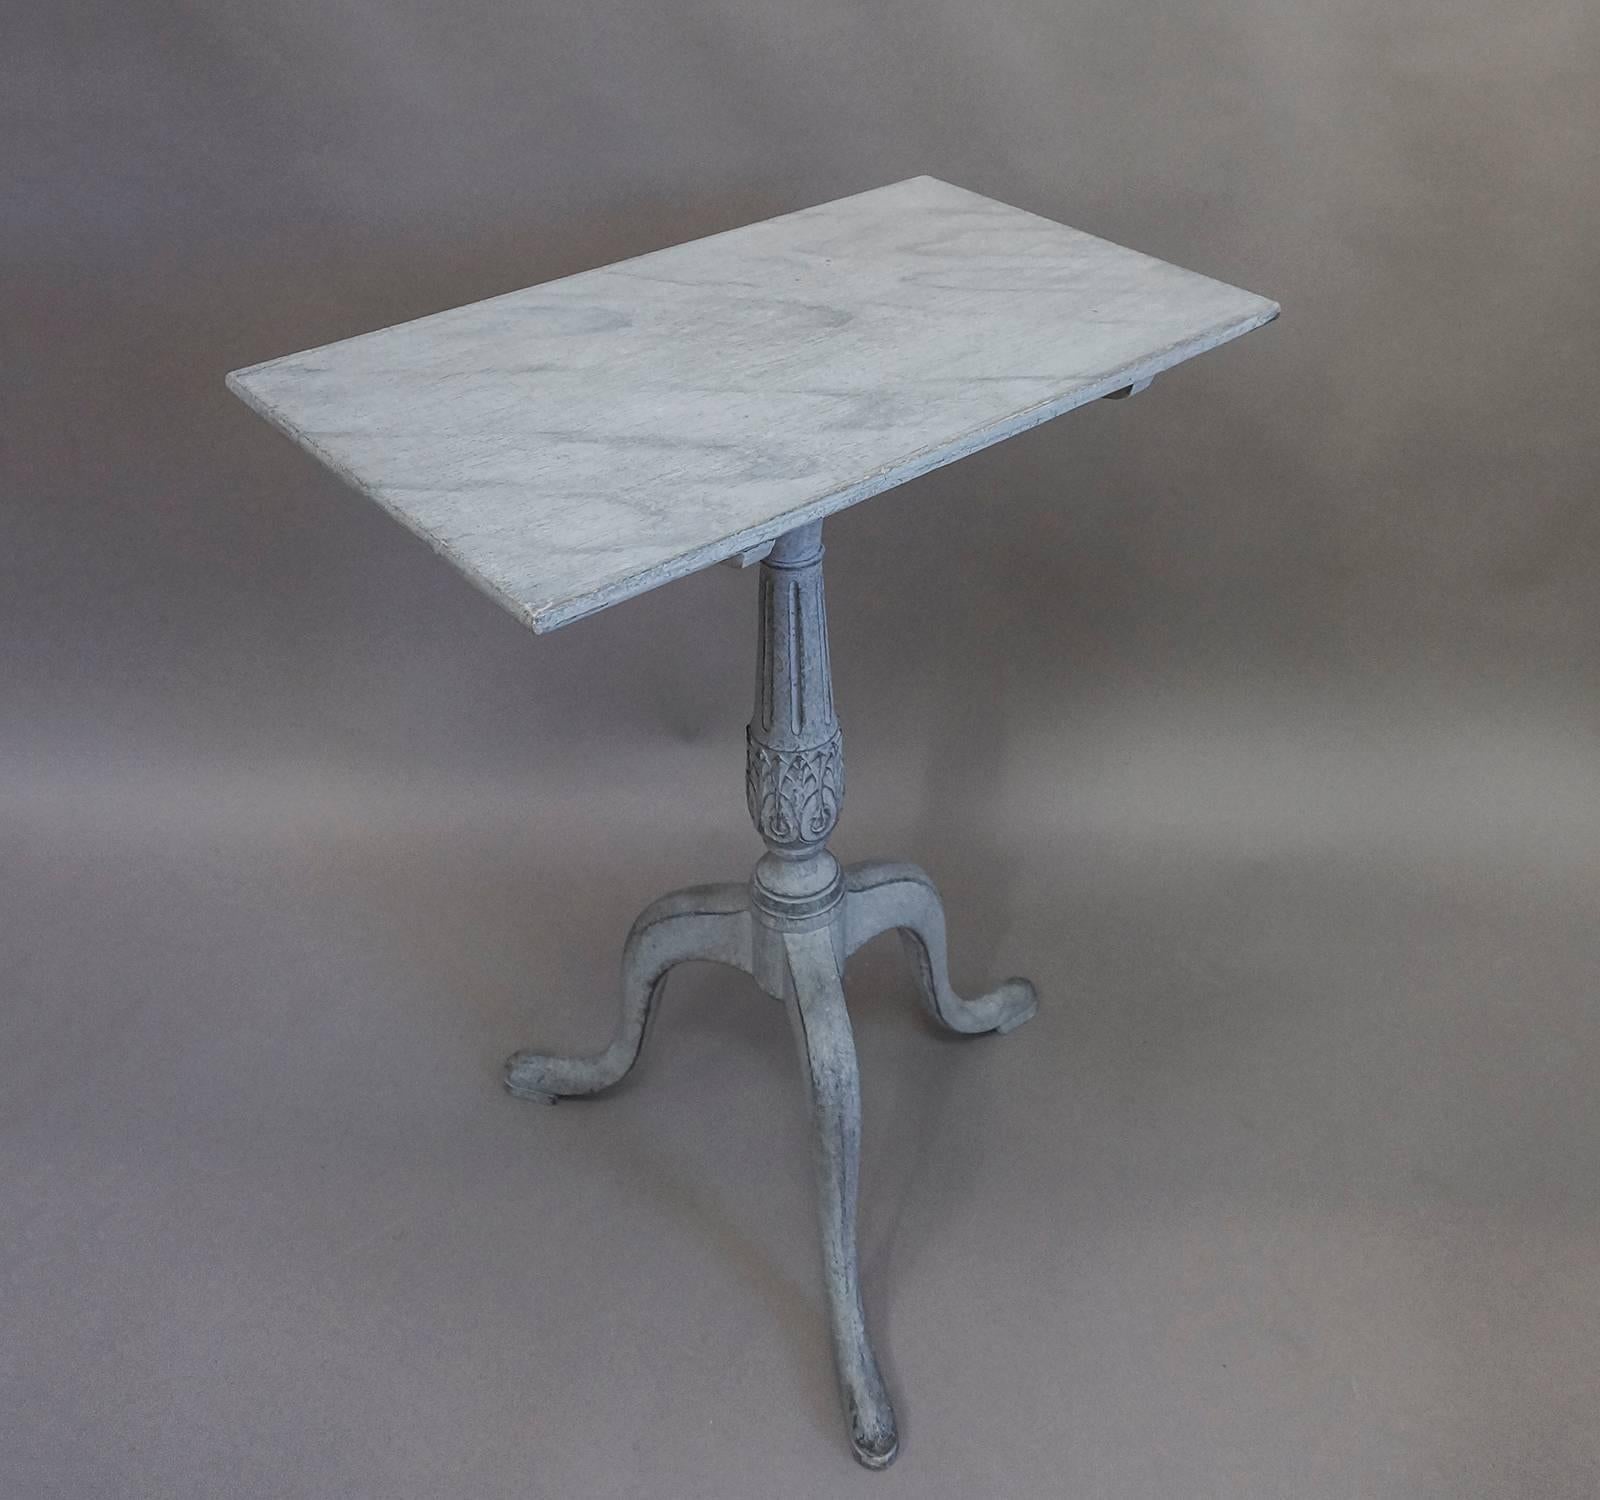 Tilt-top table, Sweden, circa 1820, with acanthus leaf carving circling the pedestal base and three legs with snakeshead feet. The rectangular top is marbleized in shades of blue-gray.